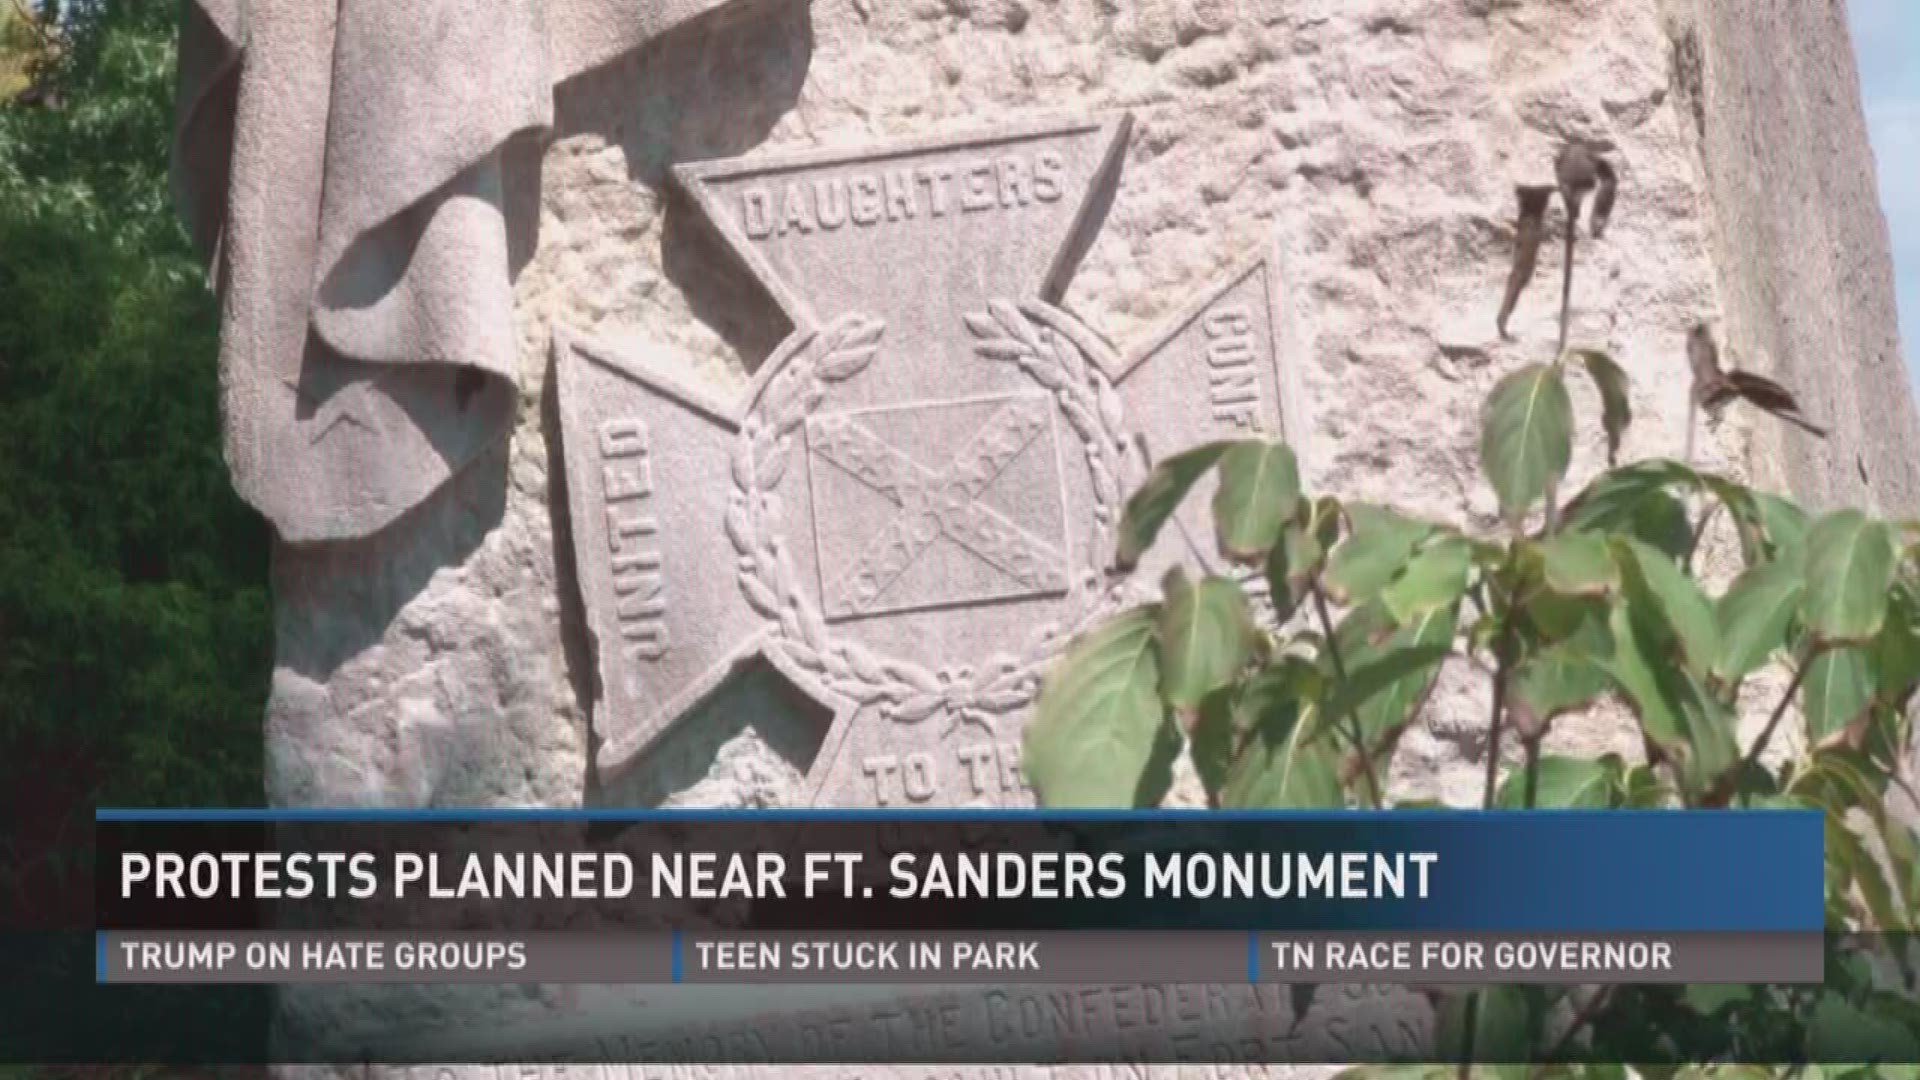 Several groups on both sides of the issue have said they will gather near the Confederate monument in Knoxville's Fort Sander's neighborhood